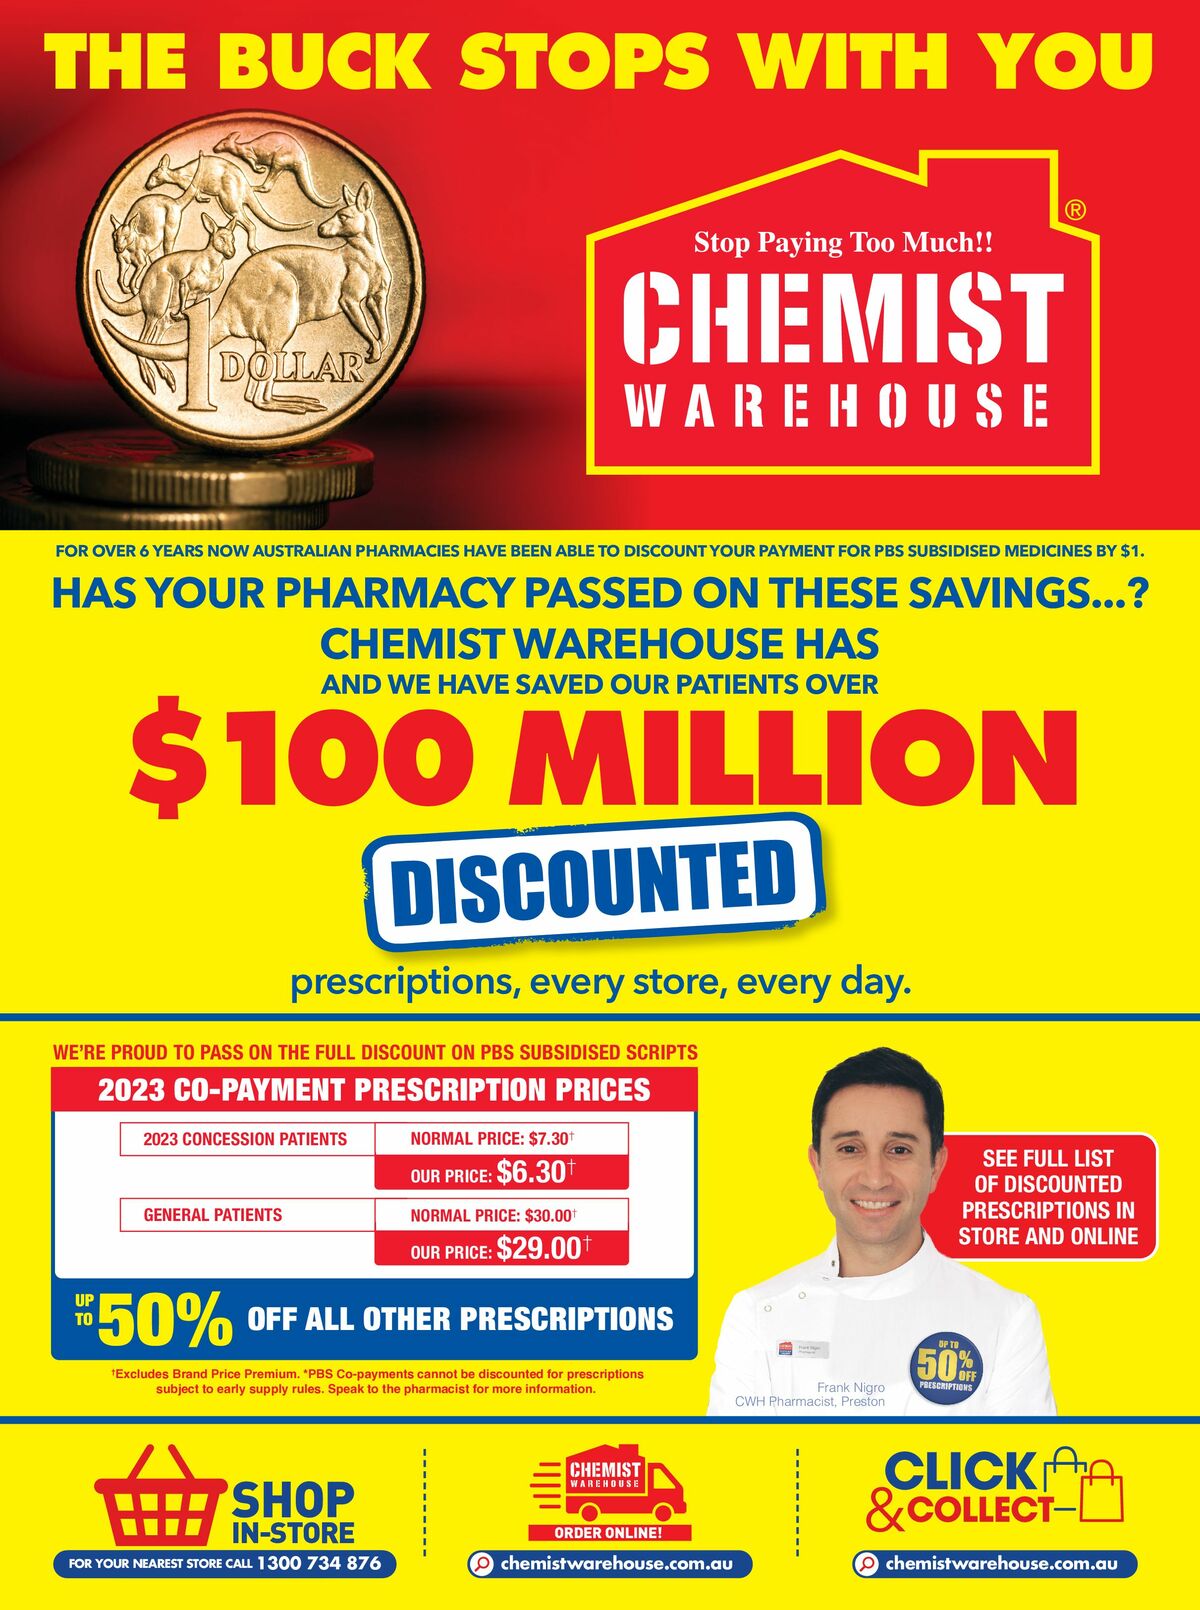 Chemist Warehouse Discounted! Prescriptions Catalogues from 2 August